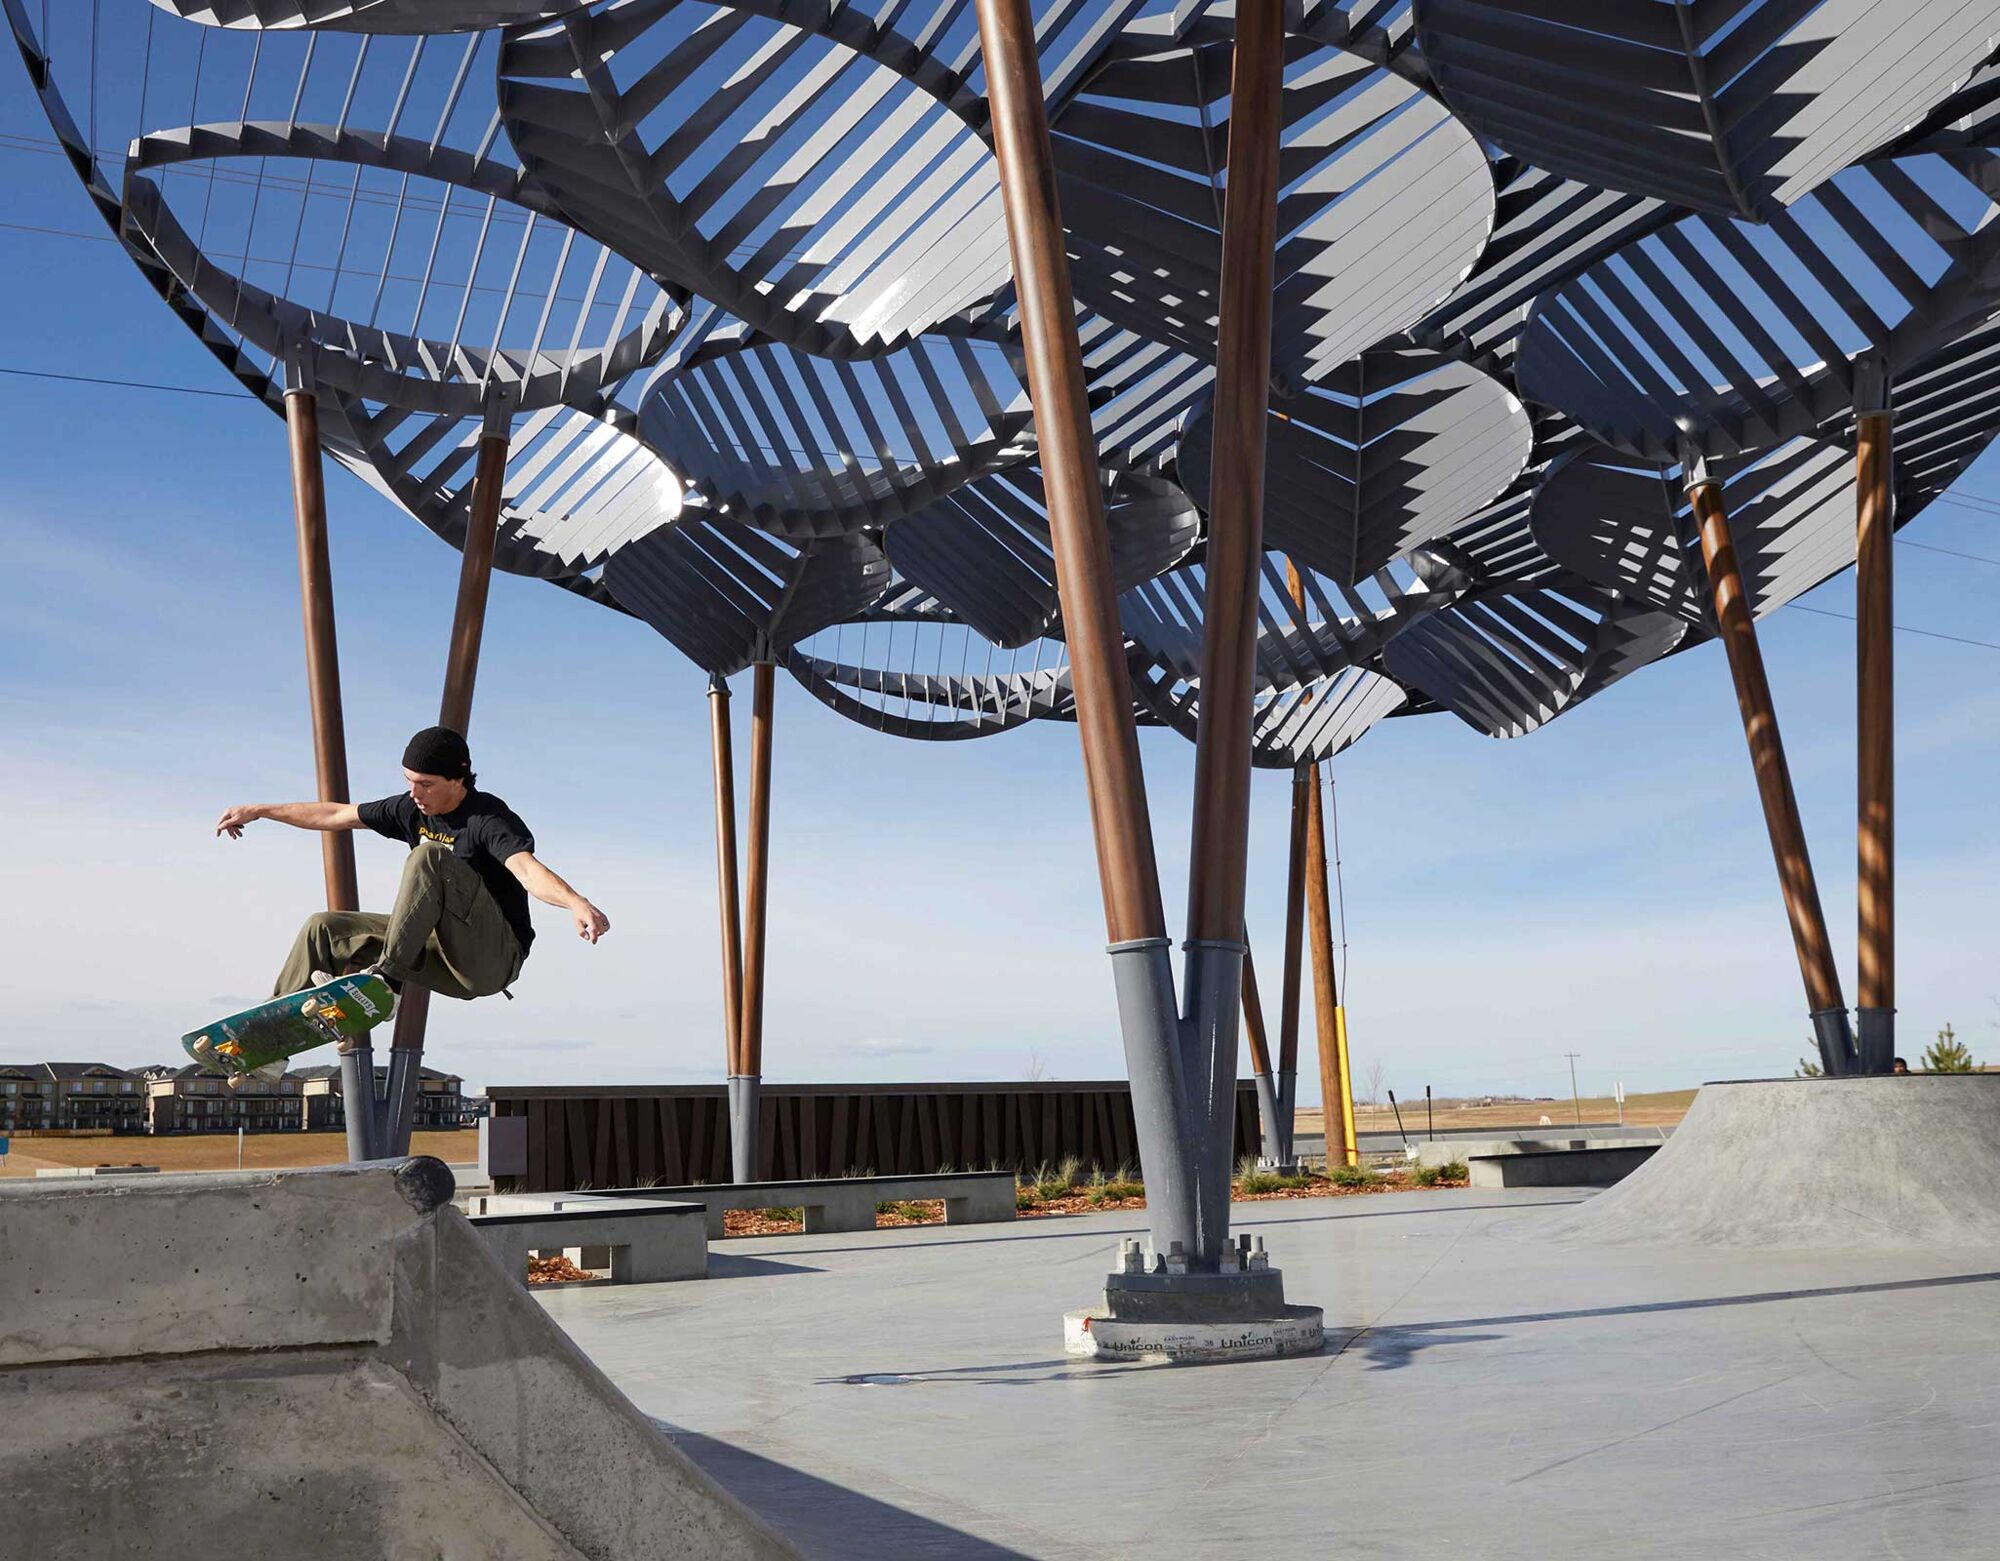 Boy on a skateboard on ramp in a park with large leafy metal designs in the background.